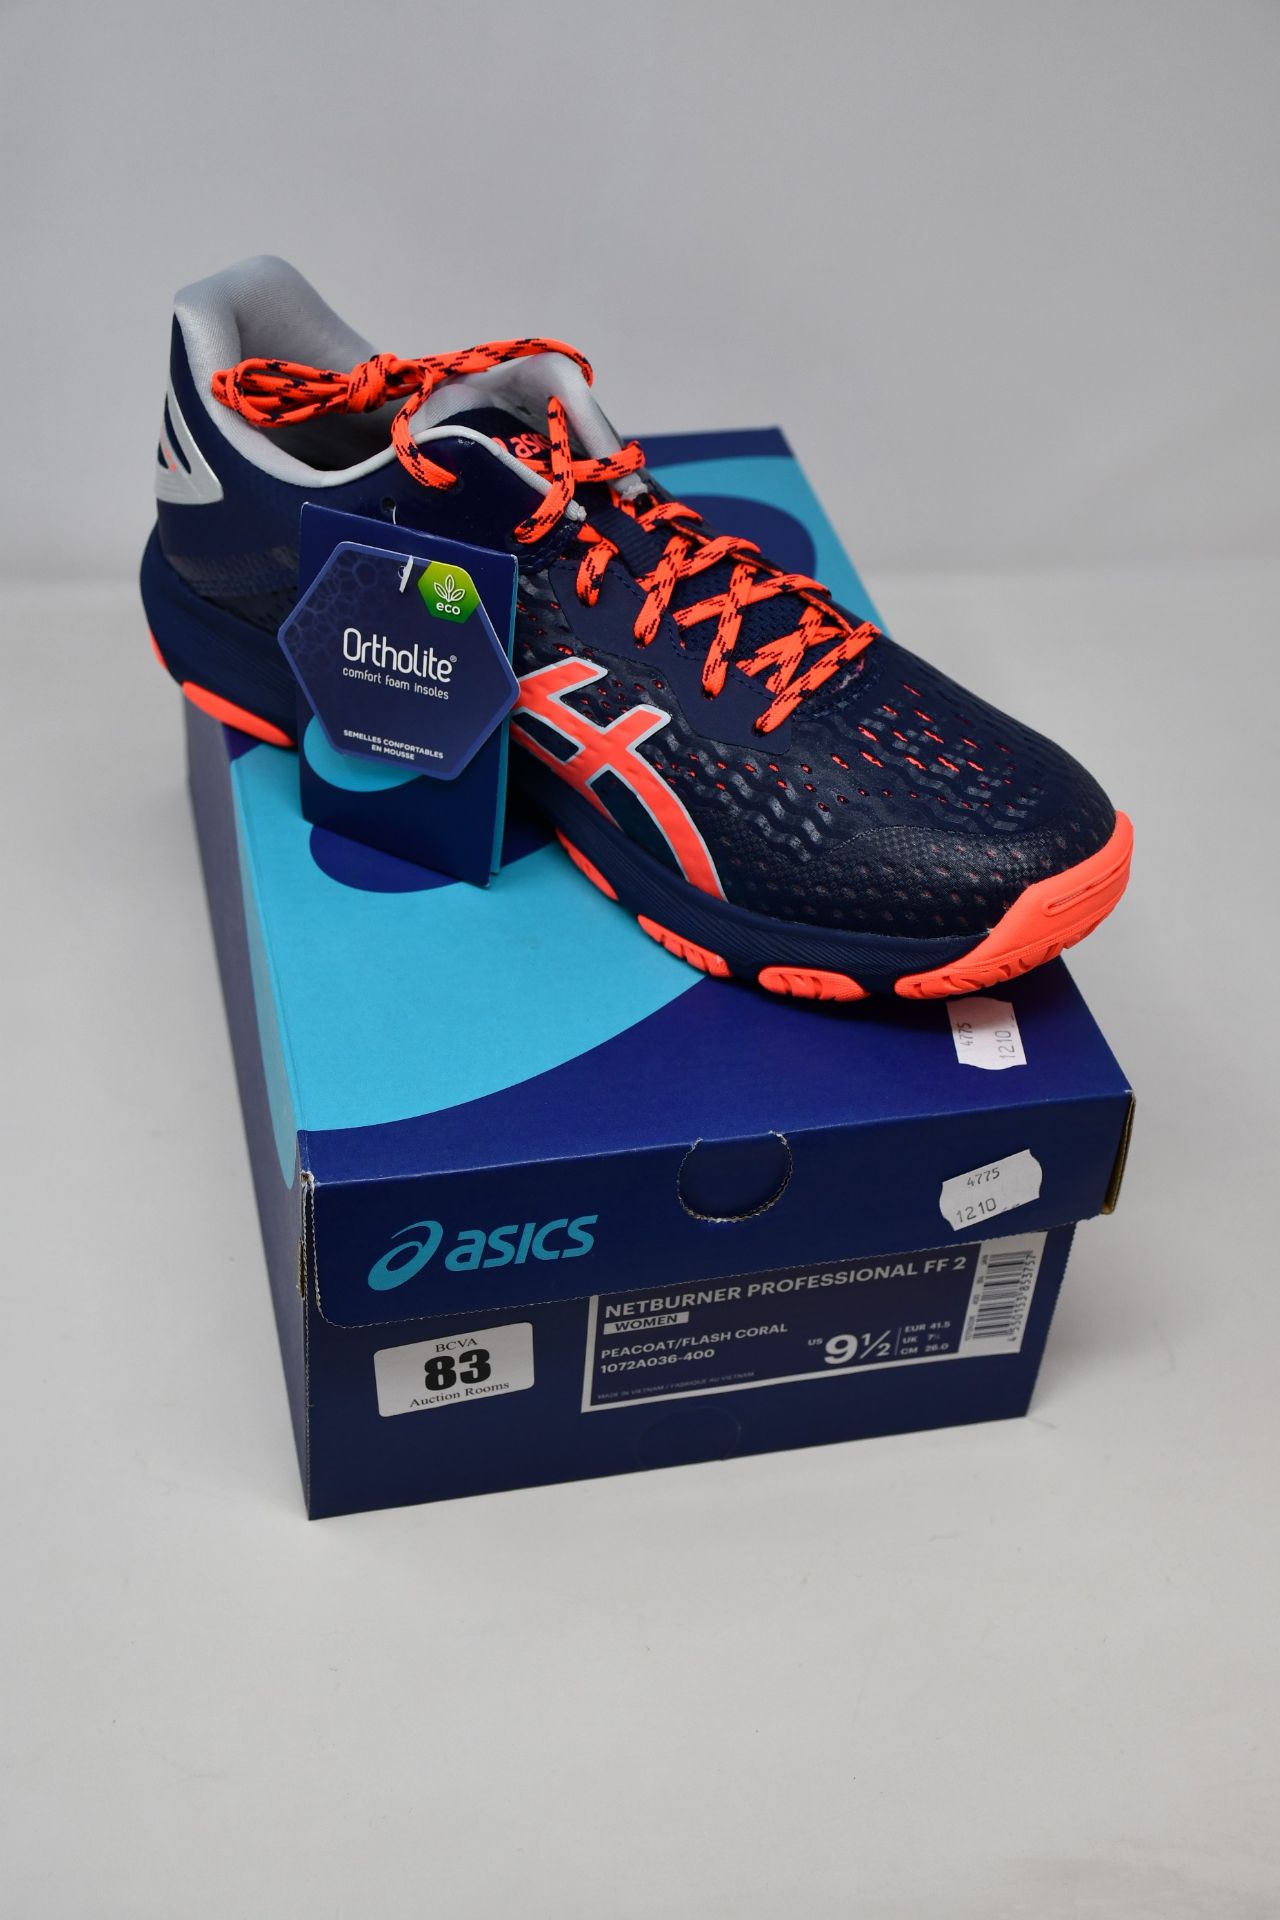 A pair of as new Asics Netburner Super FF 2 trainers (UK 7.5).